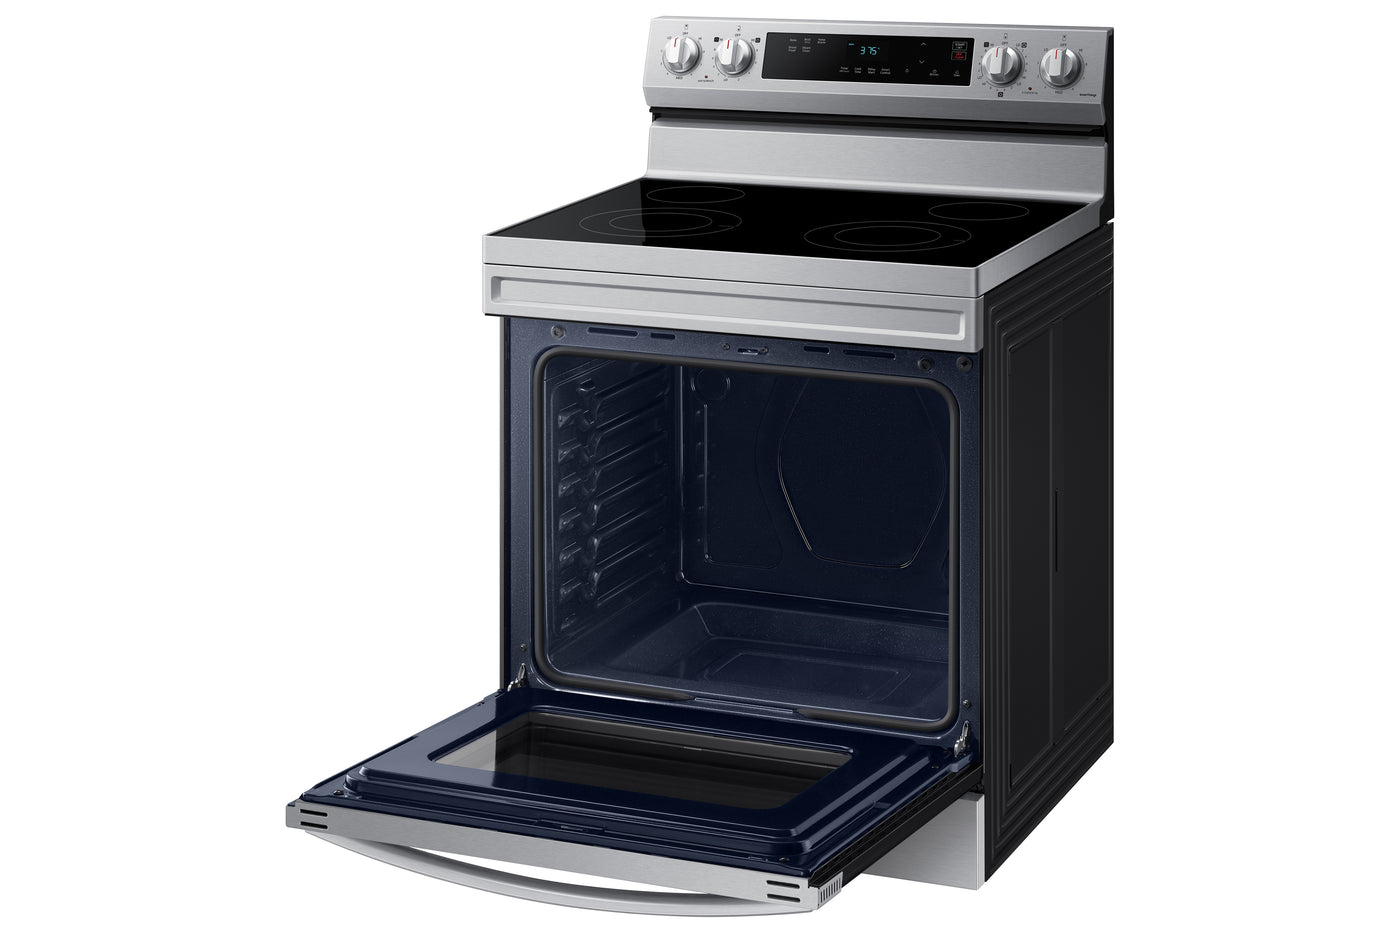 Samsung Stainless Steel Freestanding Electric Range with Wi-Fi (6.3 Cu.Ft) - NE63A6111SS/AC